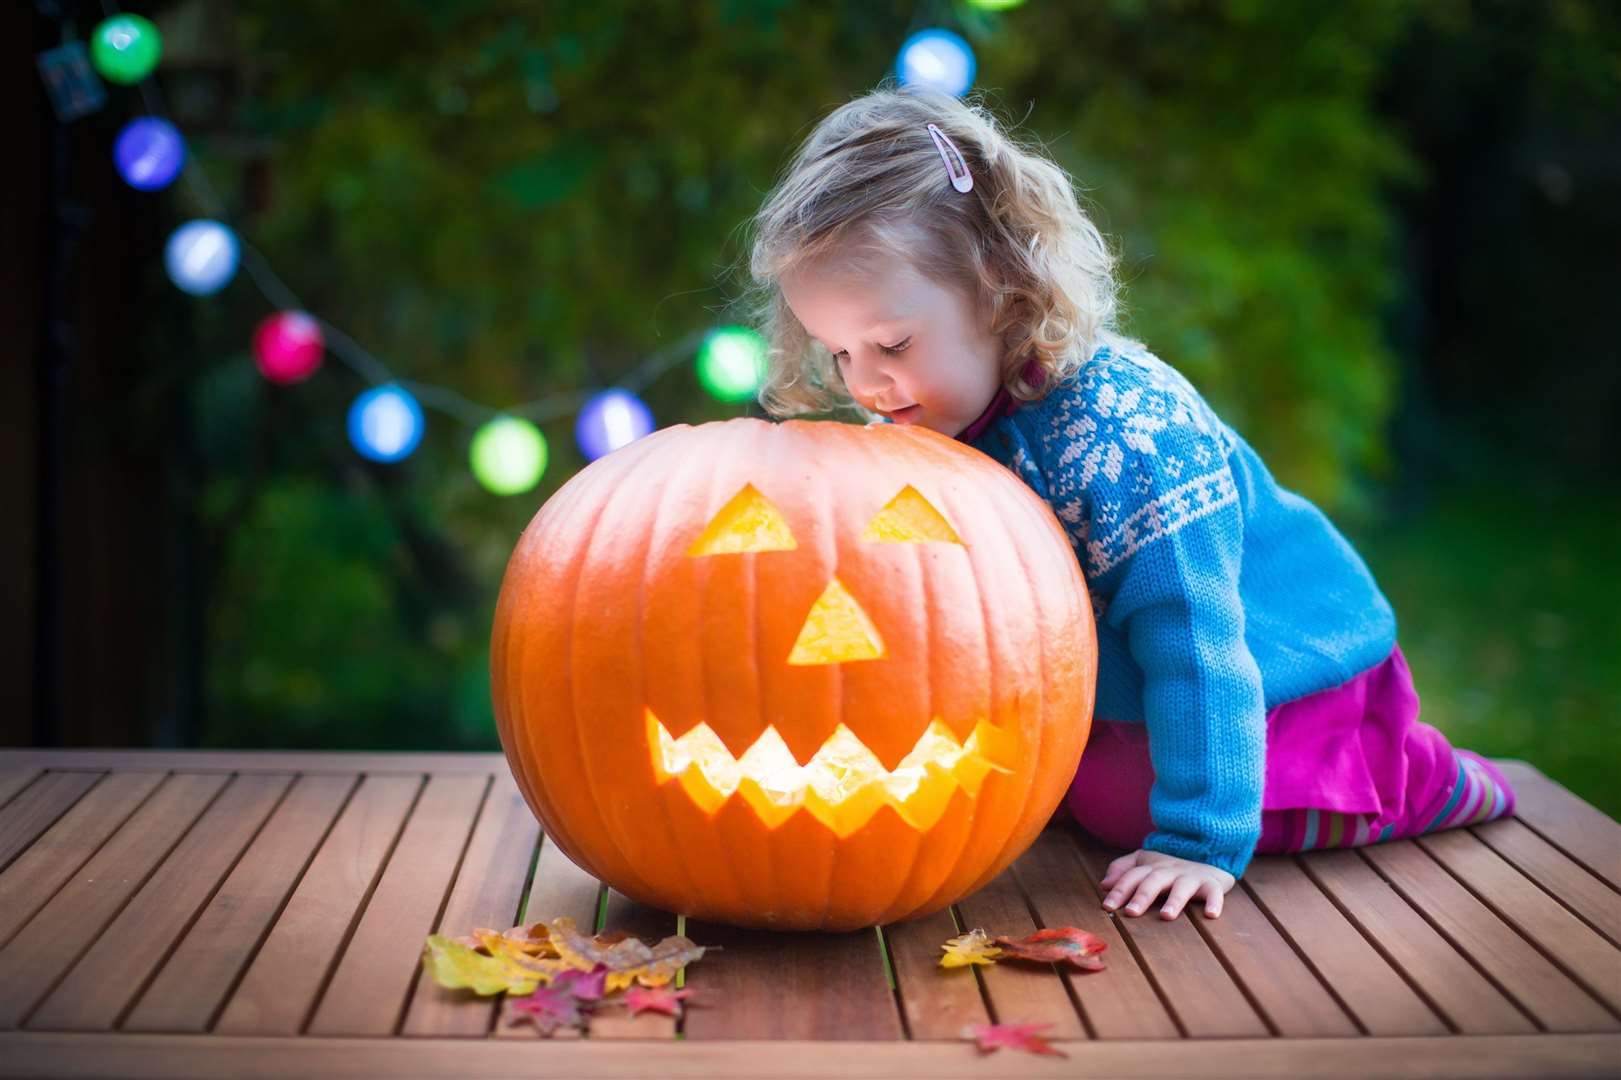 Bring your pumpkin indoors at night to protect it from the elements and temperature extremes